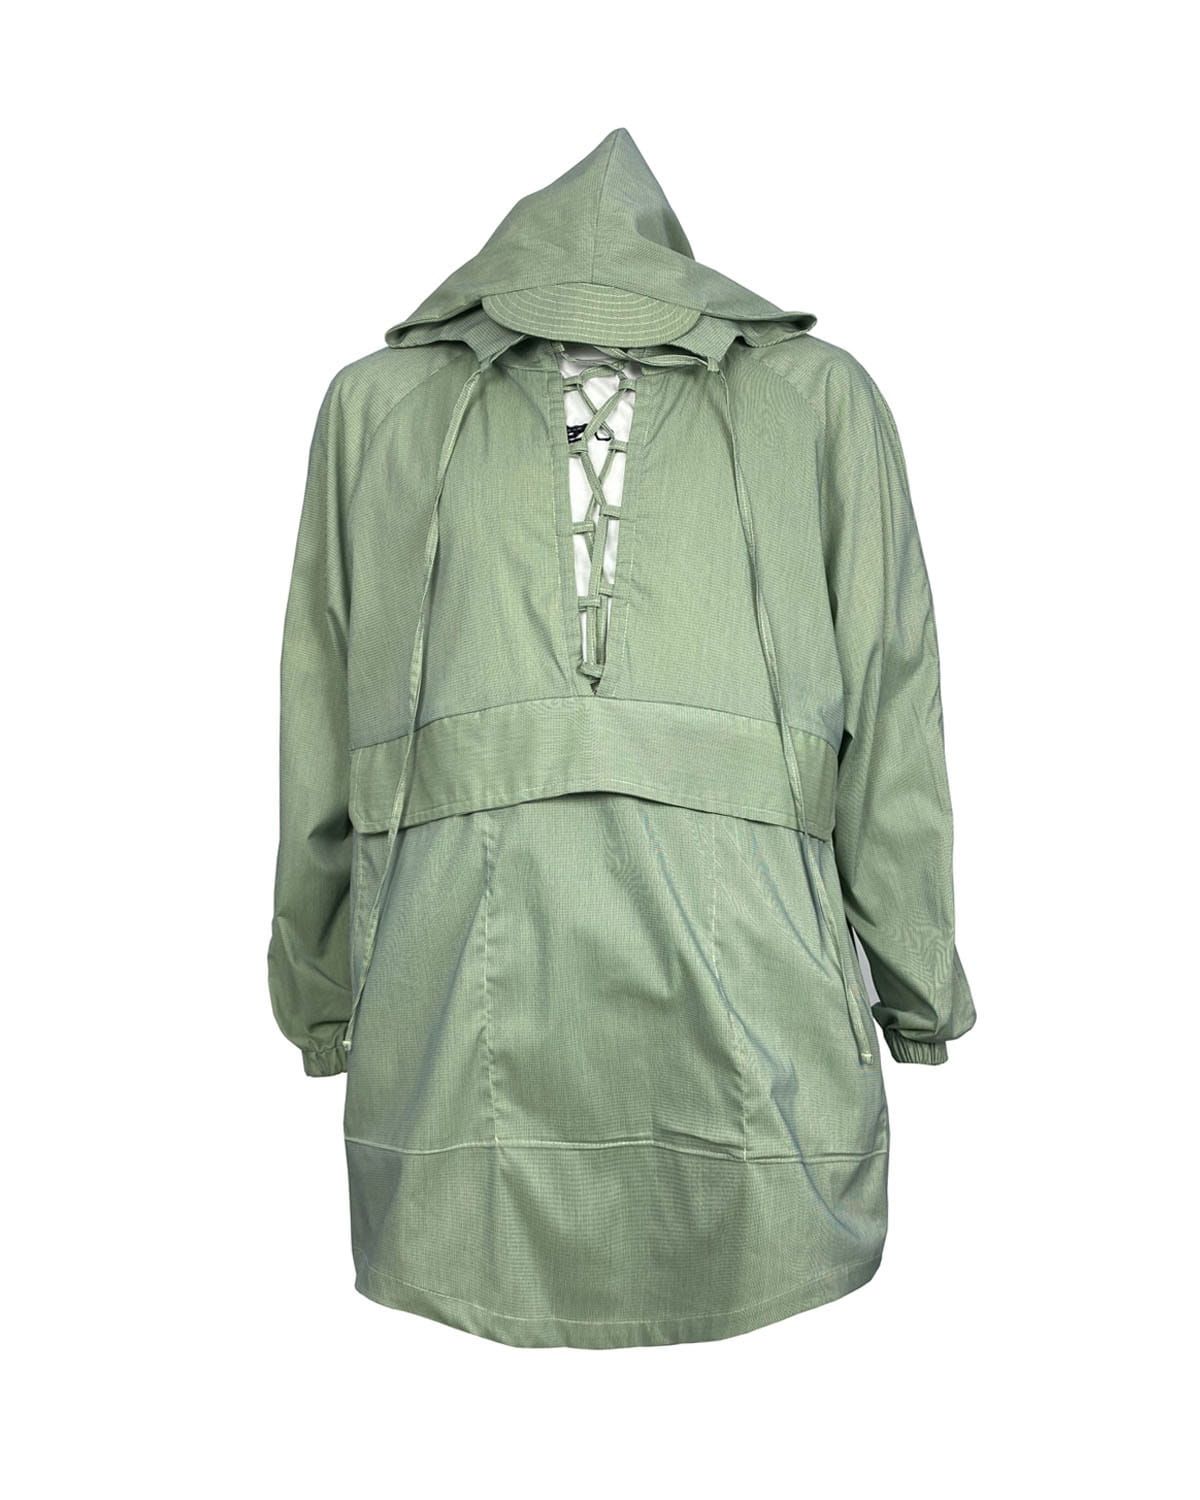 lace-up anorak_GR 192.000₩→58,000₩